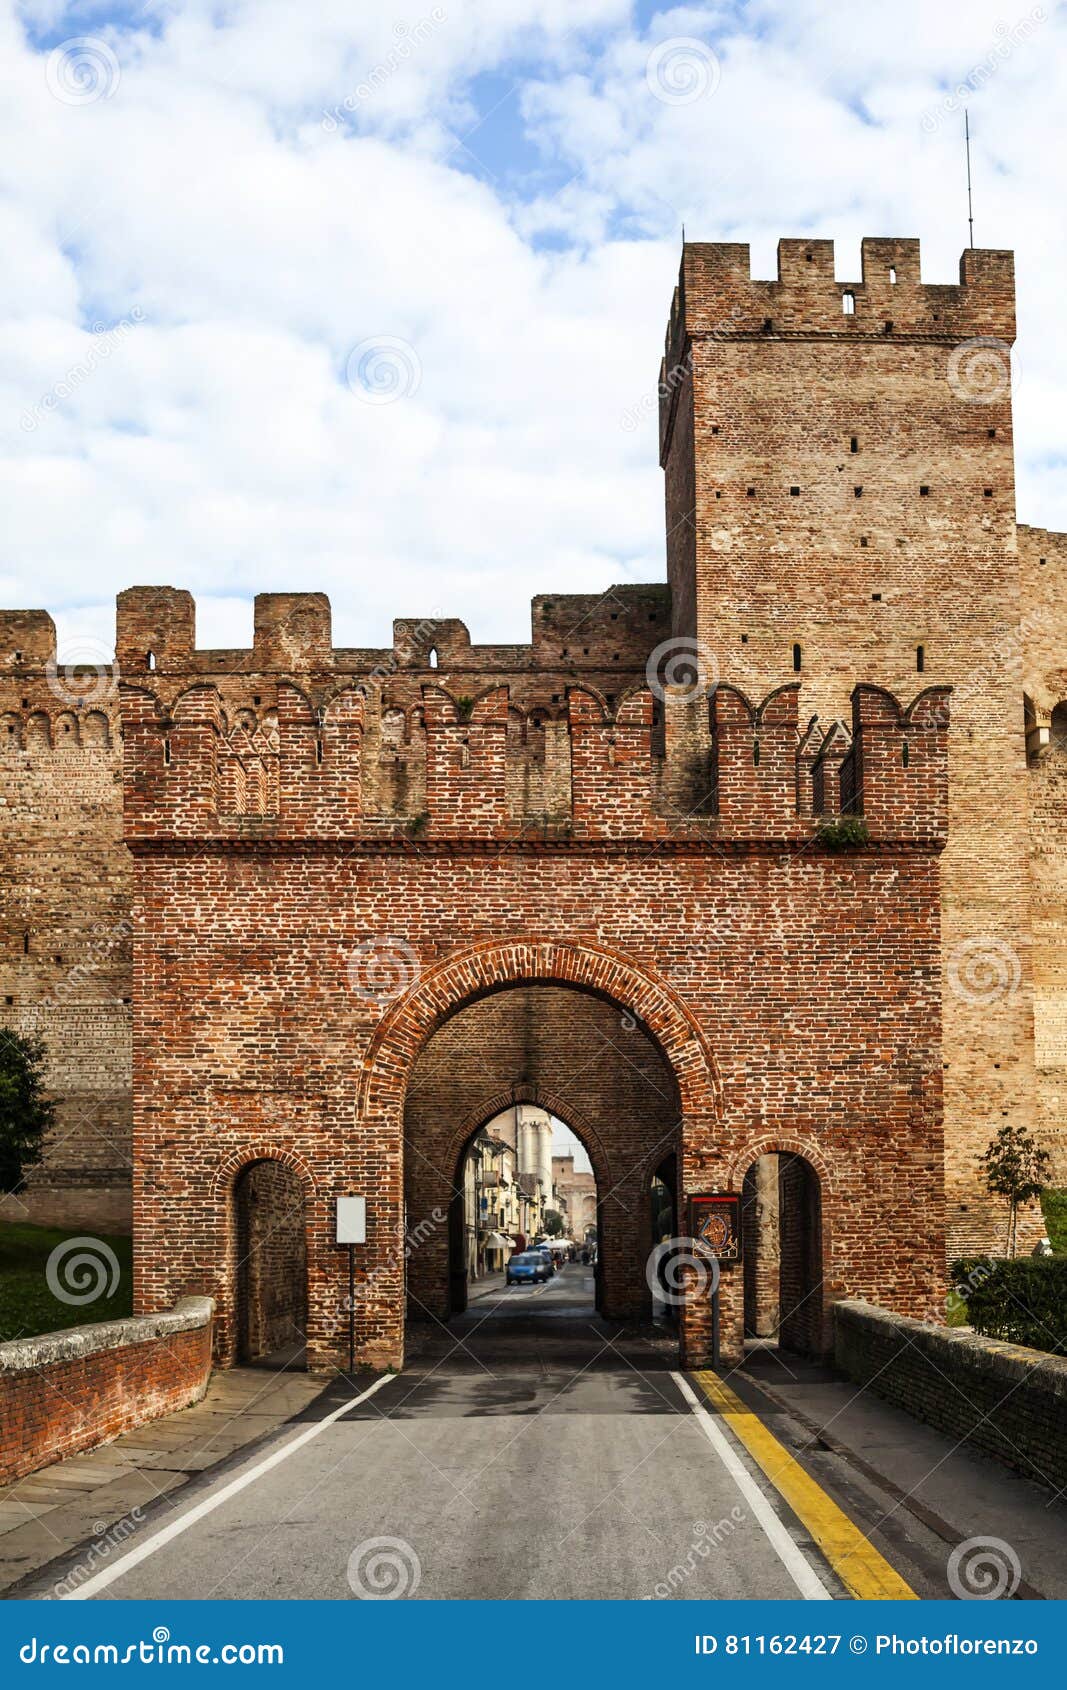 fort gate of walled city cittadella